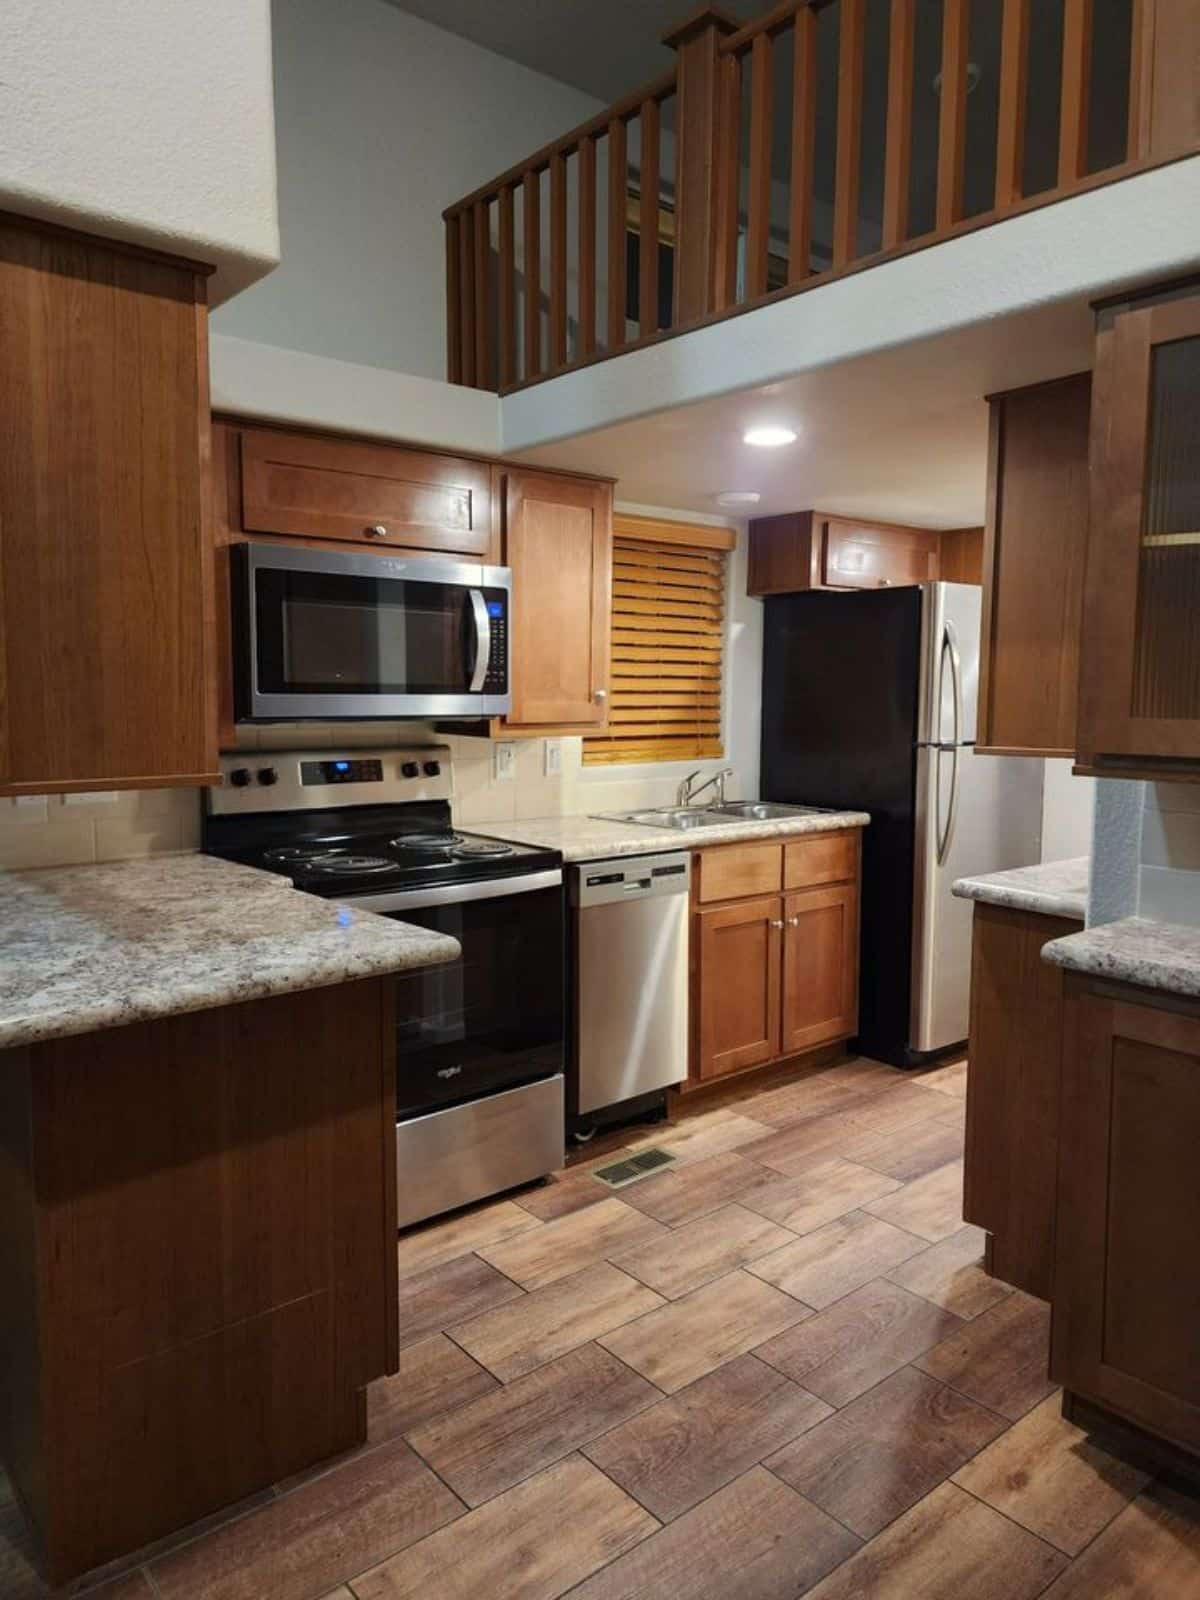 Pantry area in kitchen of Spacious Tiny House